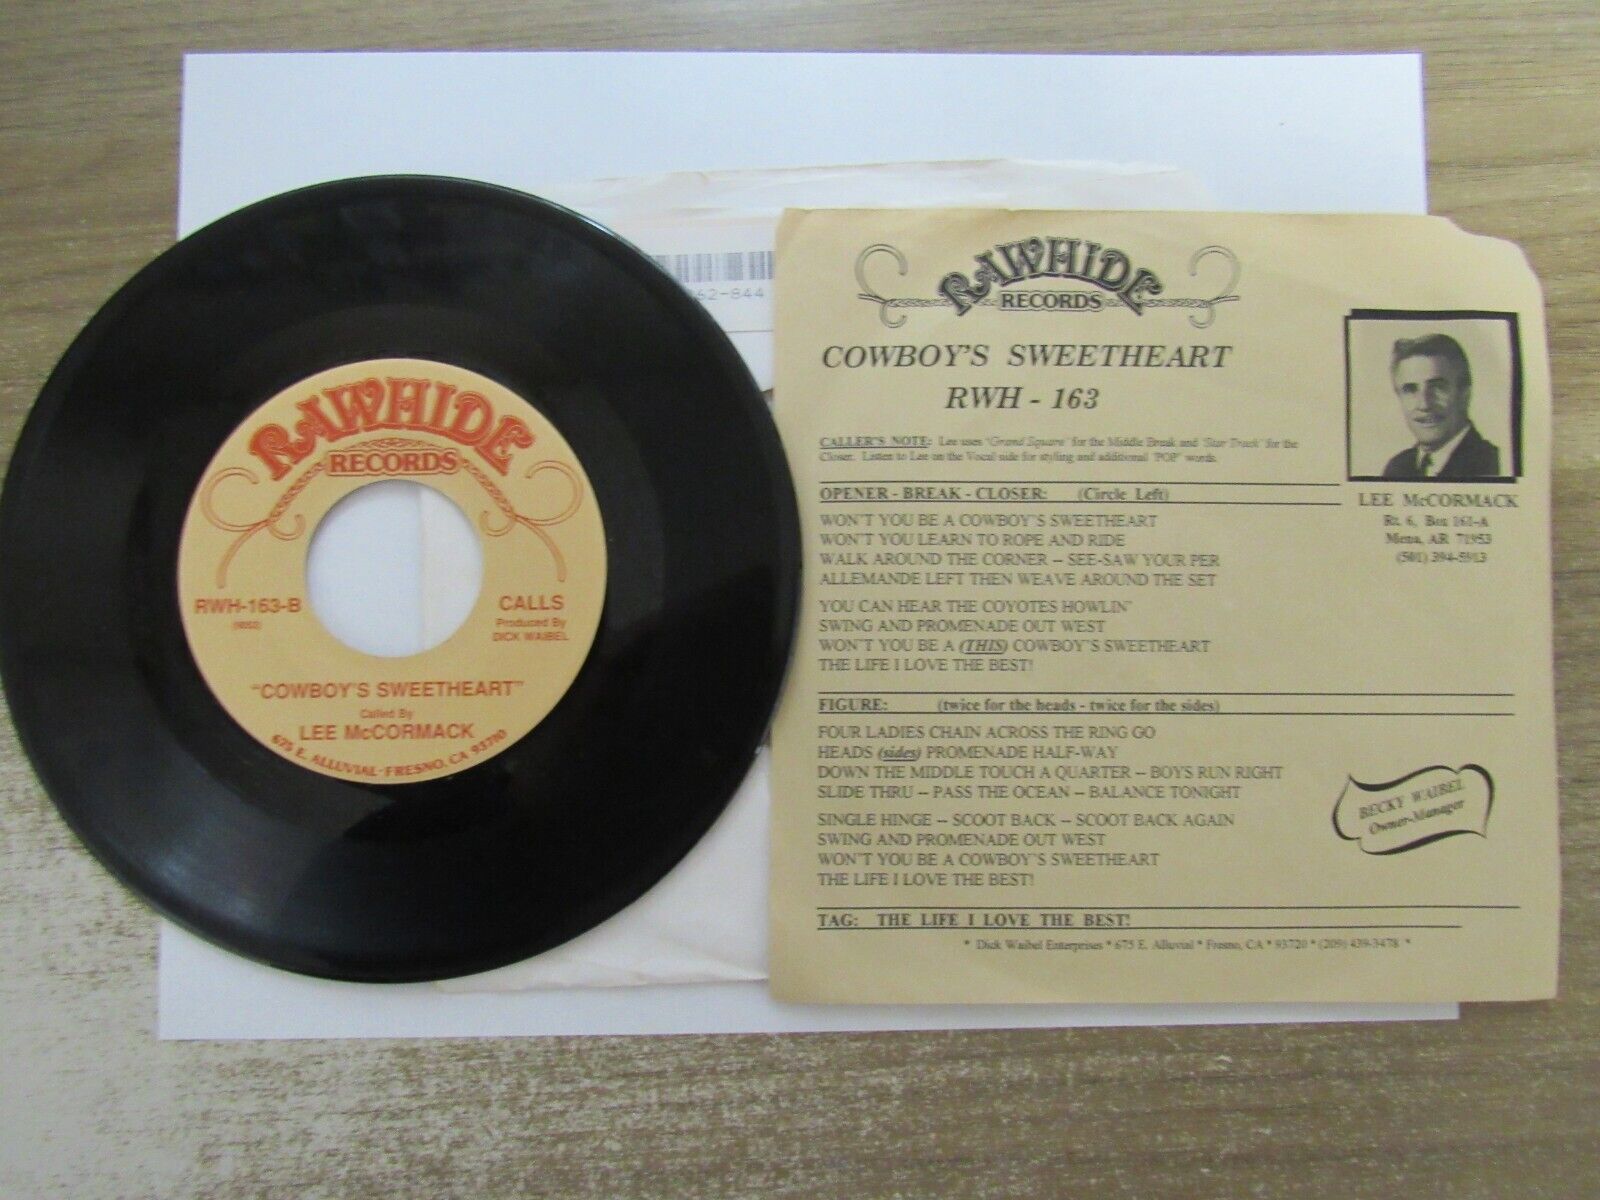 Old 45 RPM Record - Rawhide RWH 163 - Cowboy's Sweetheart (calls &music)